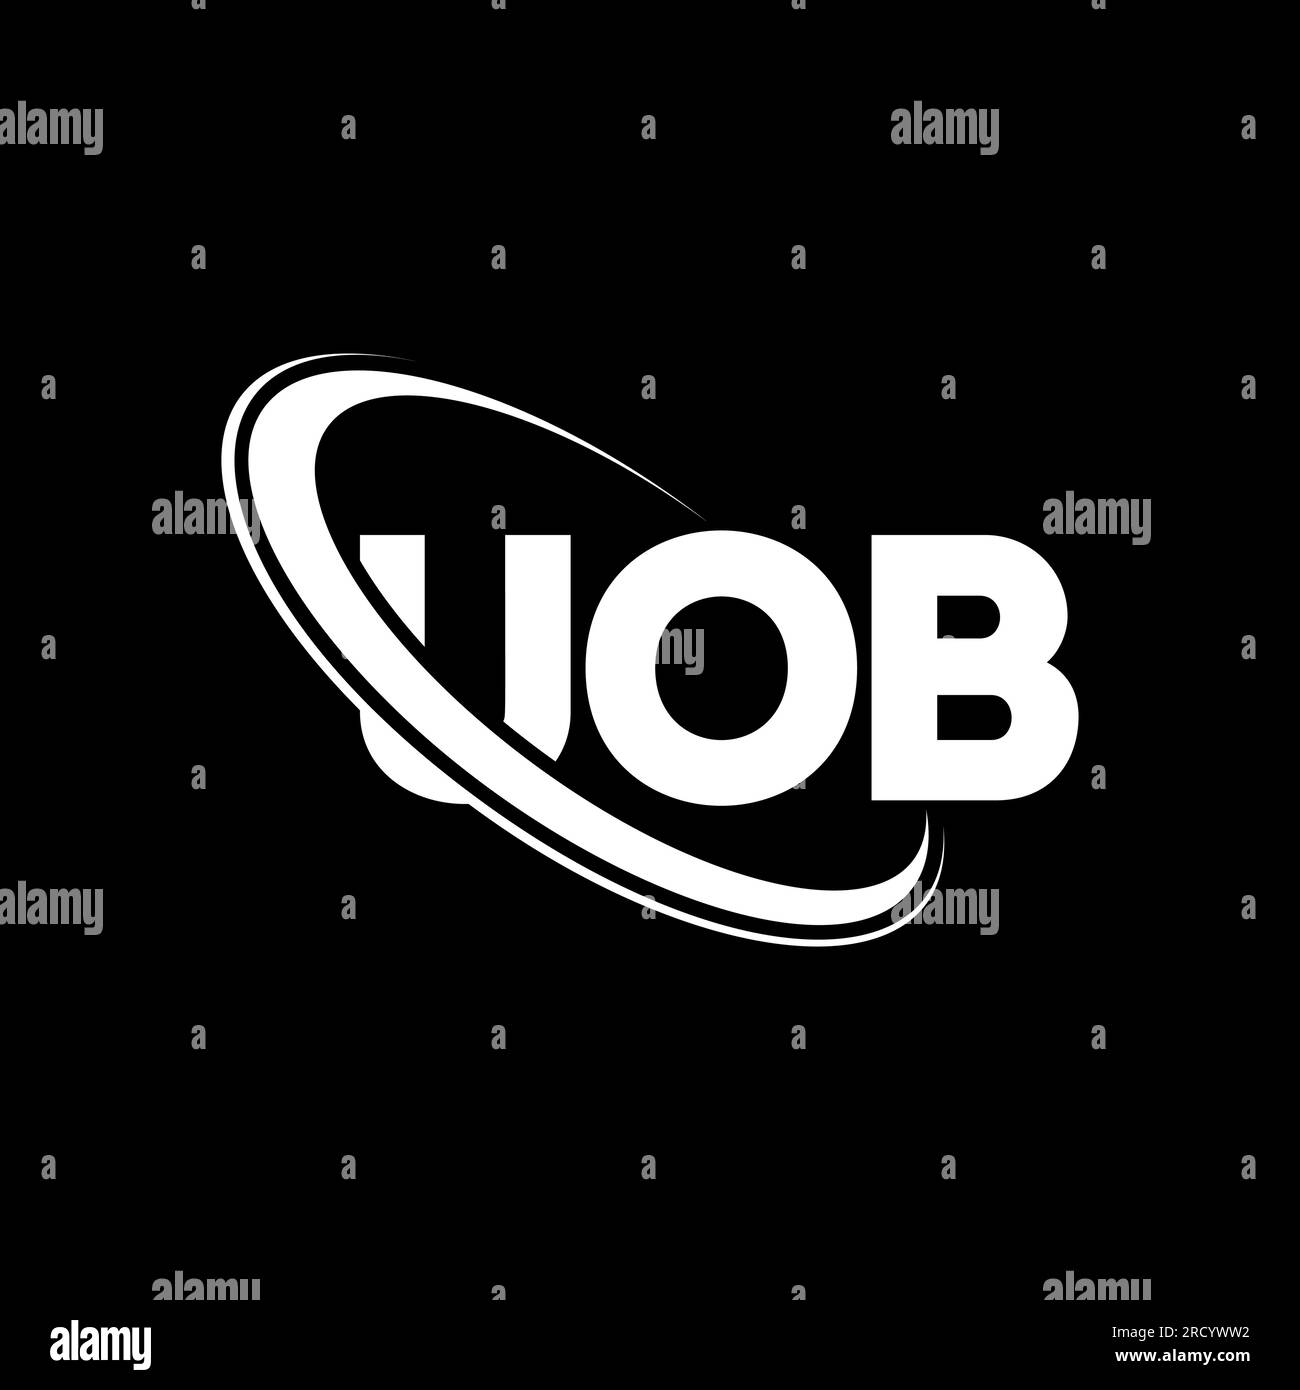 UOB logo. UOB letter. UOB letter logo design. Initials UOB logo linked with circle and uppercase monogram logo. UOB typography for technology, busines Stock Vector